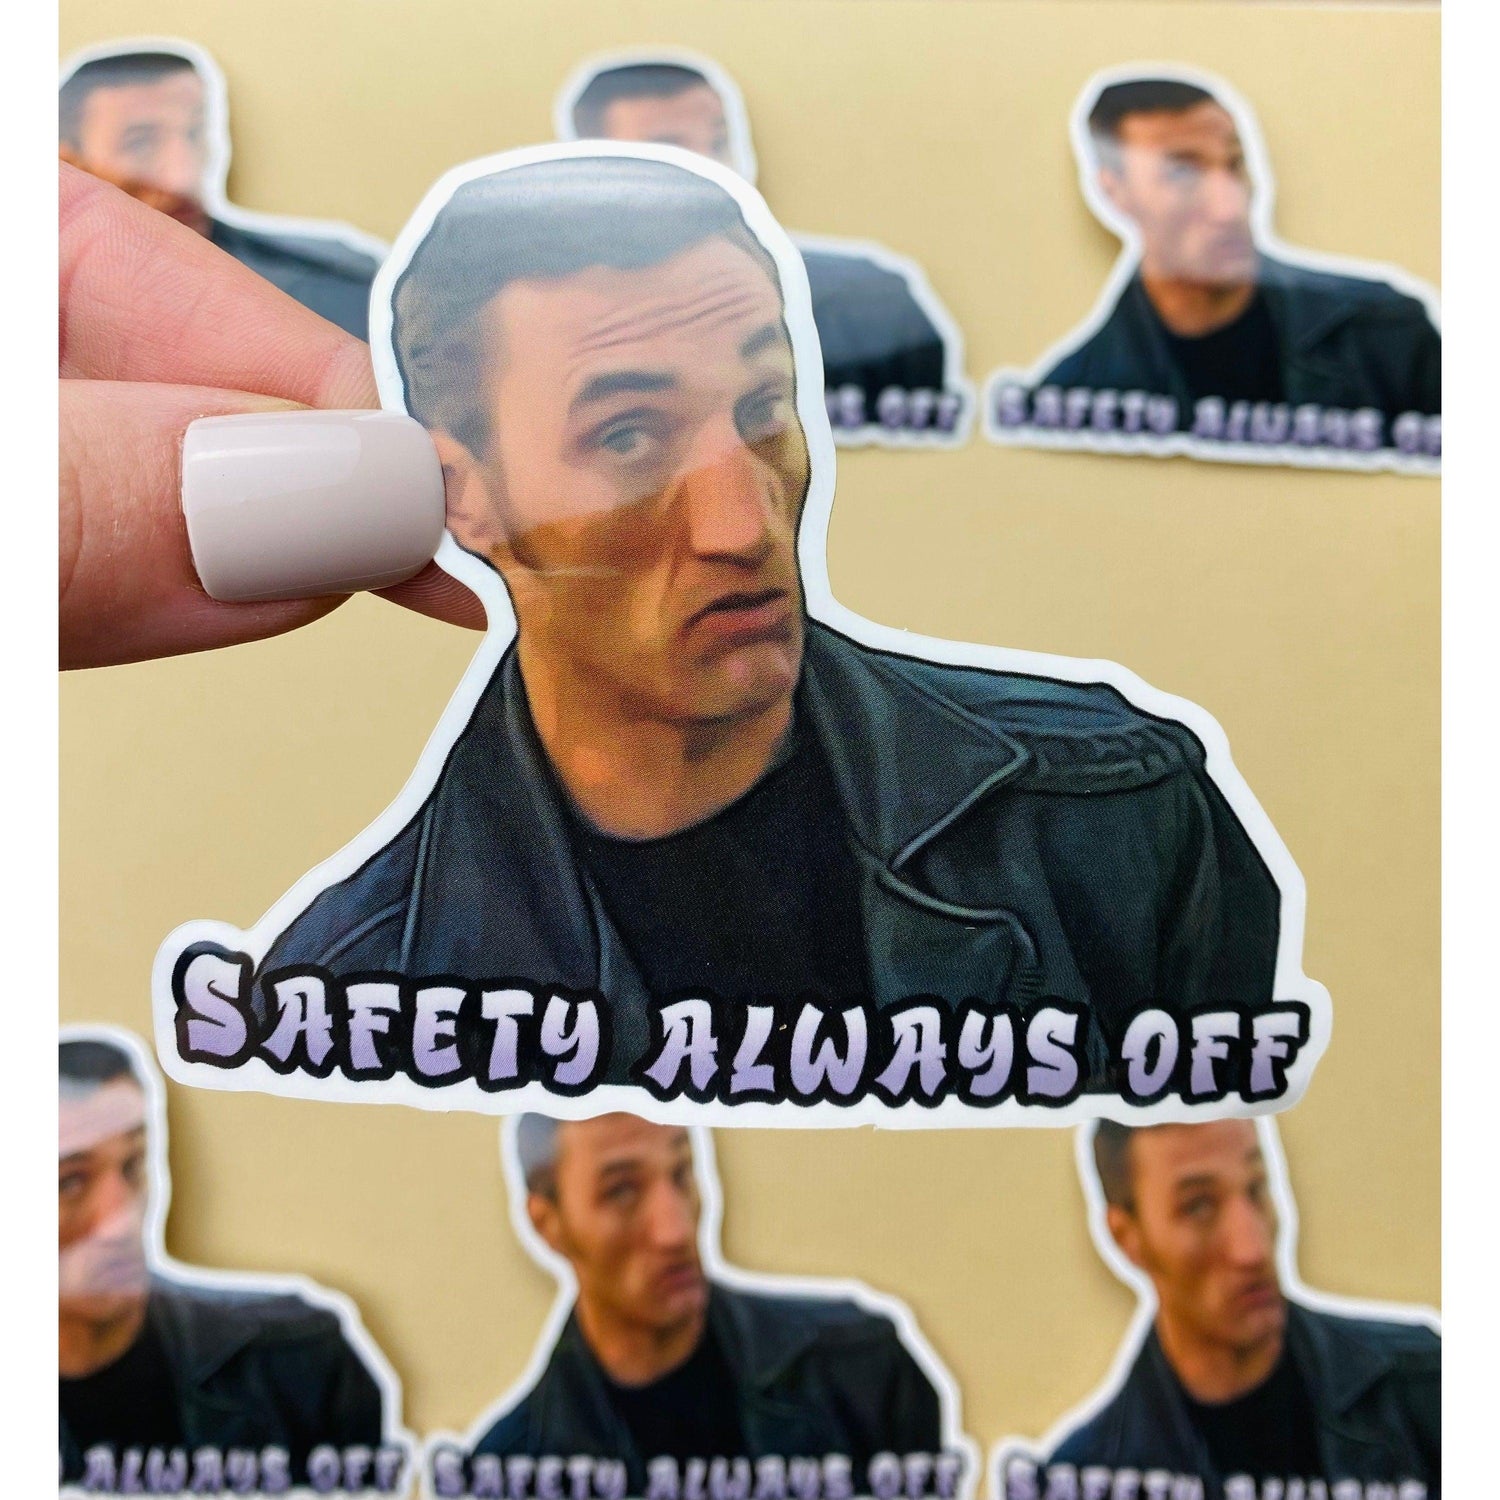 Trailer Park Boys Cyrus Sticker | Officially Licensed Trailer Park Boys Sticker | Cyrus Sticker Trailer Park Boys Merch | Safety Always Off - Ottos Grotto :: Stickers For Your Stuff